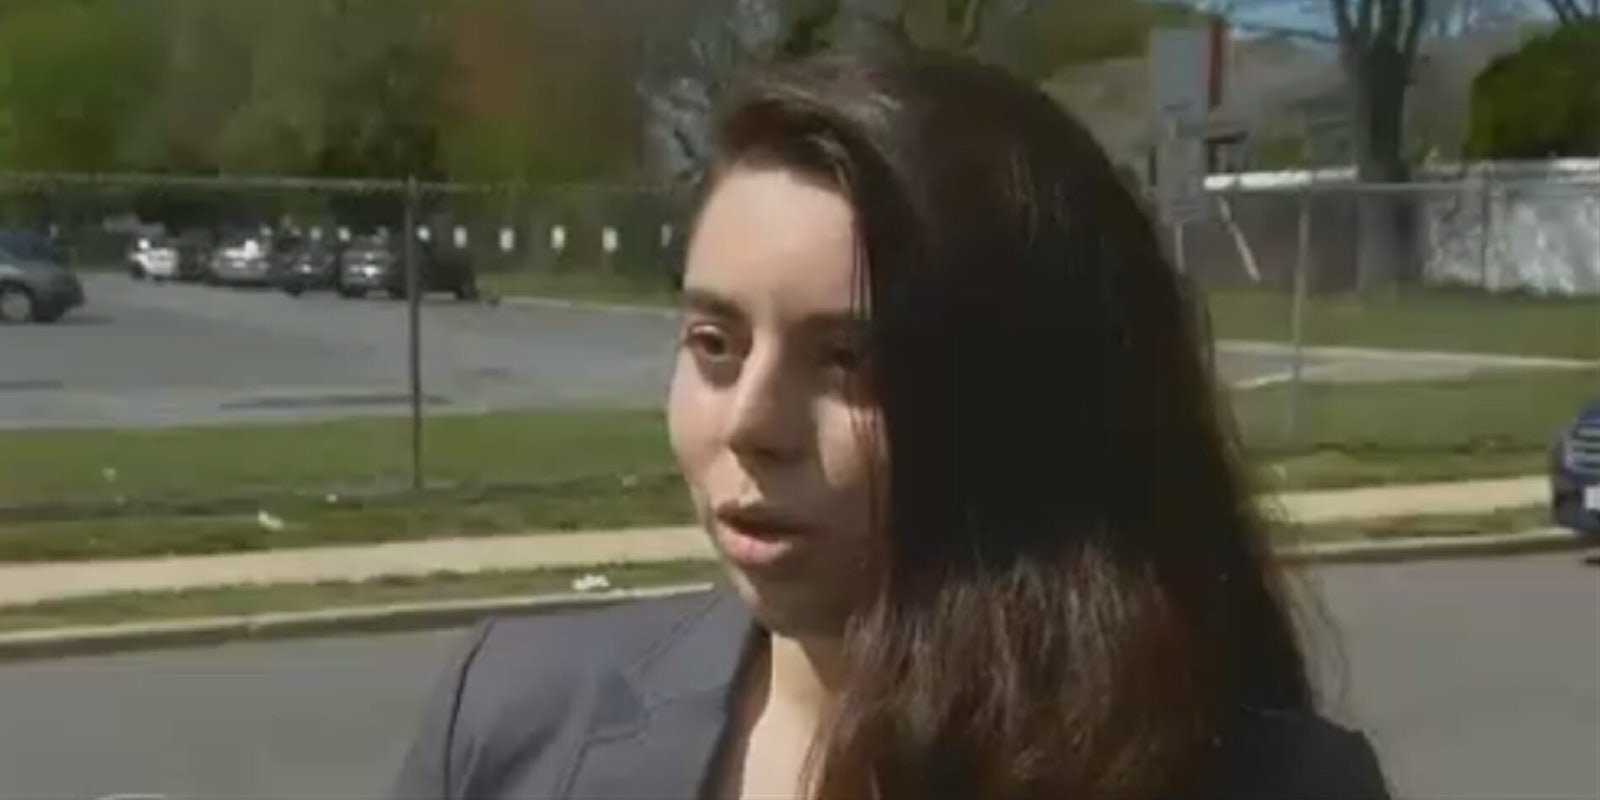 A New York teen is running for her local school board after facing a National School Walkout suspension.